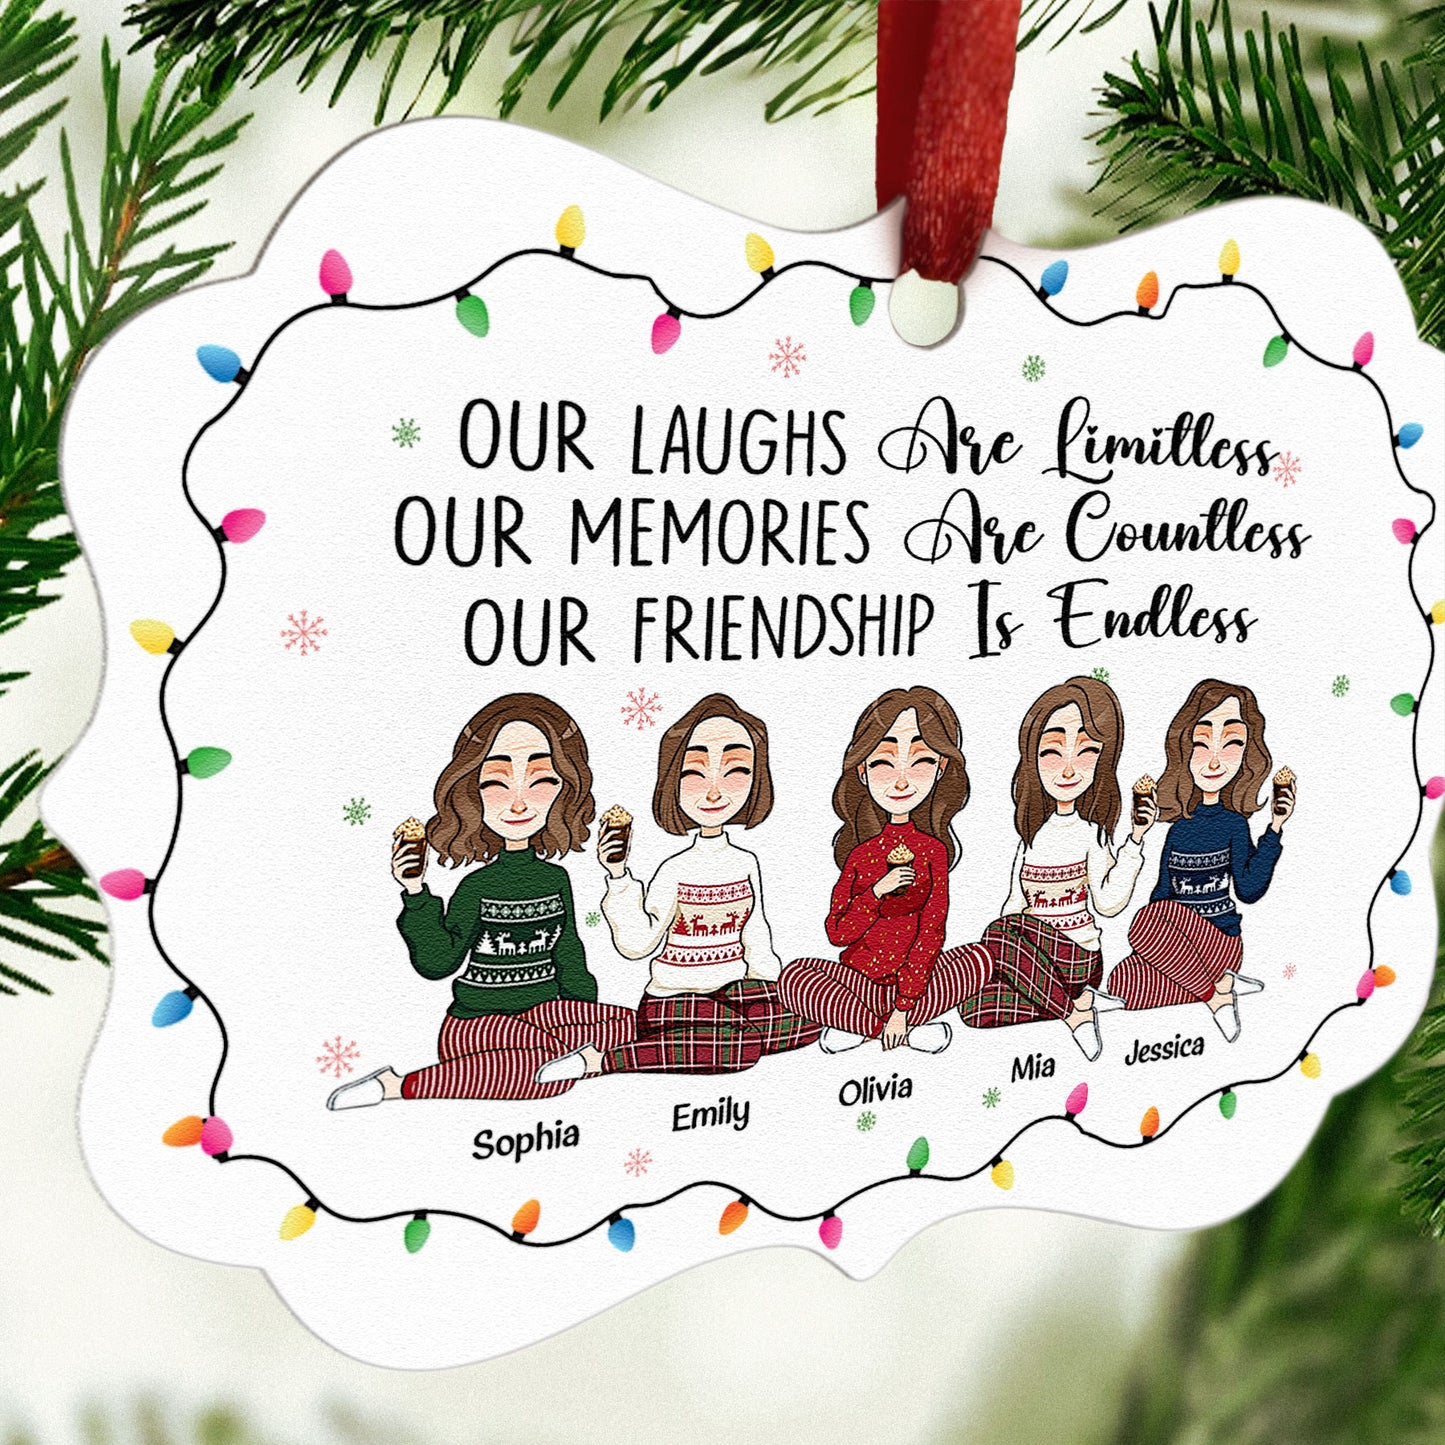 Our Friendship Is Endless - Personalized Aluminum Ornament